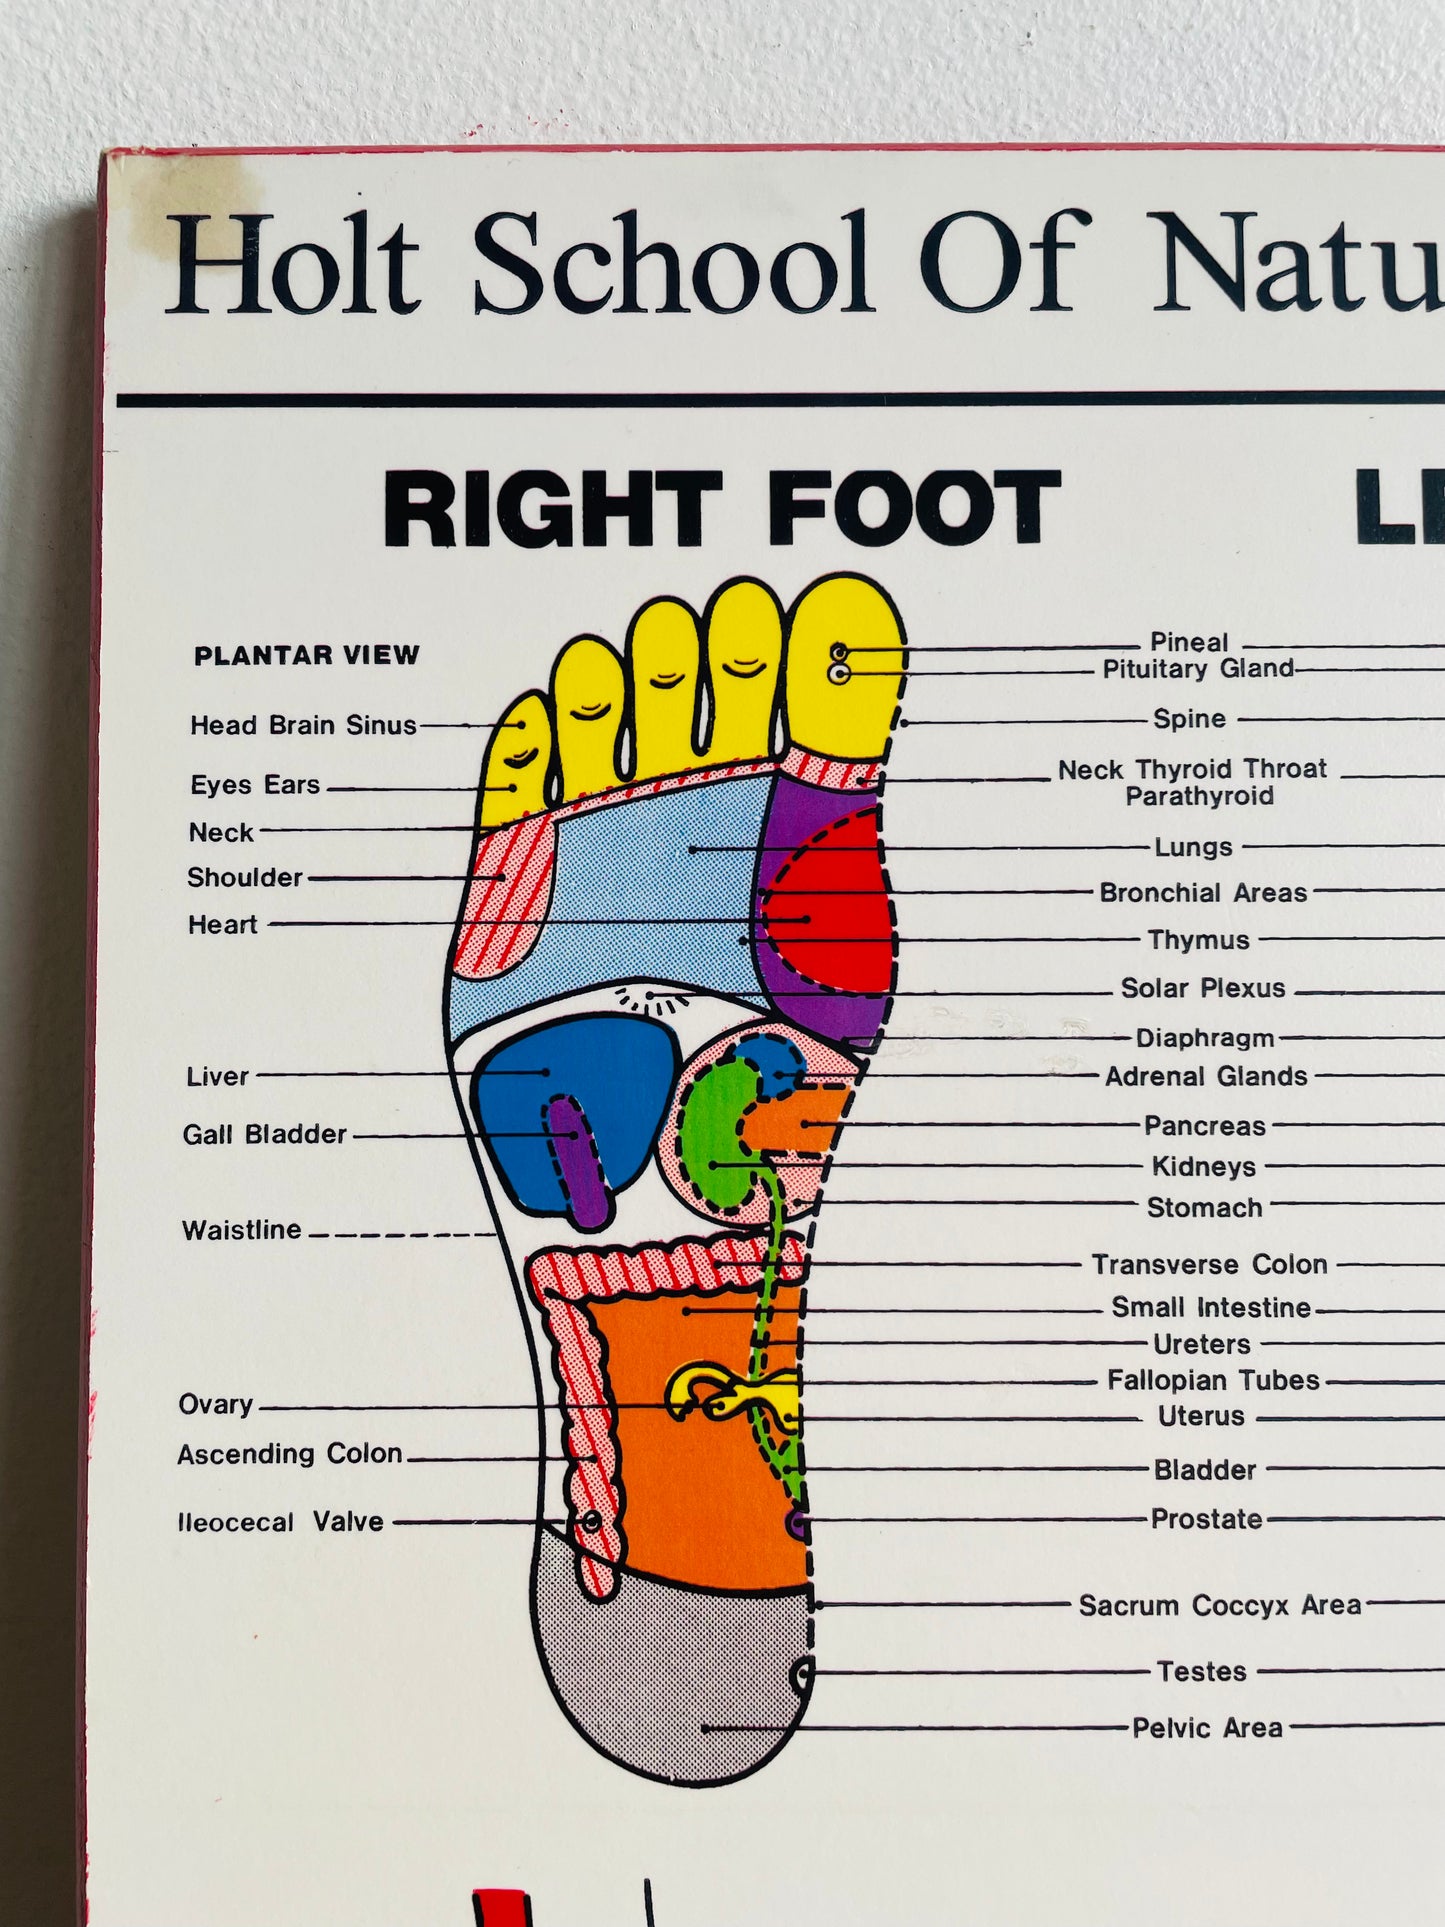 Holt School of Natural Healing Foot Reflexology Chart Mounted Picture Wall Plaque